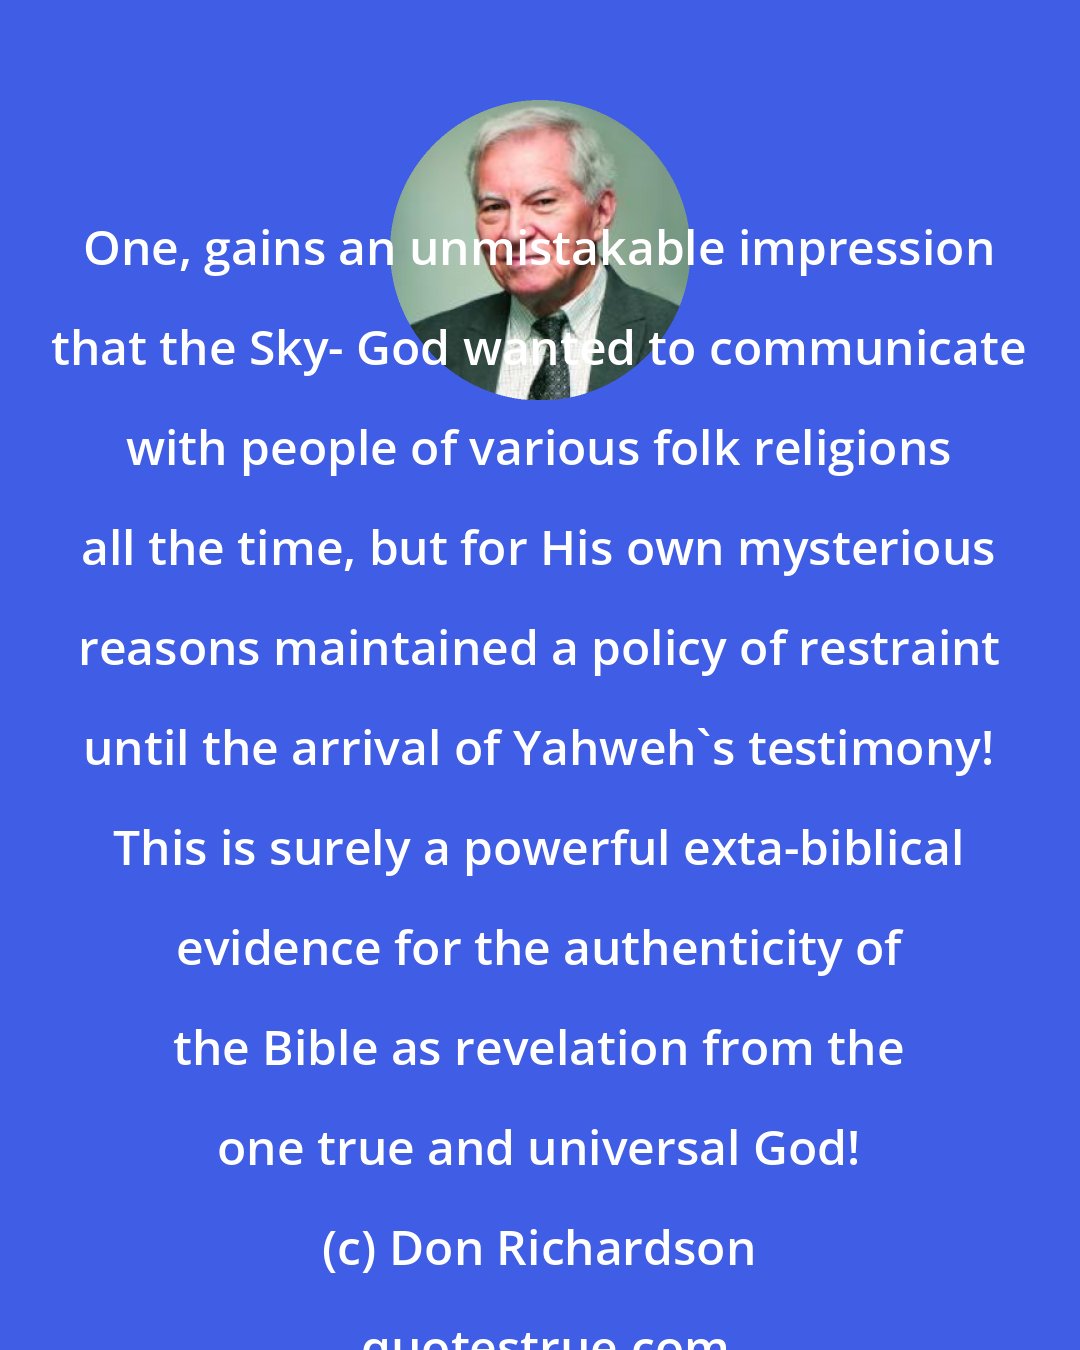 Don Richardson: One, gains an unmistakable impression that the Sky- God wanted to communicate with people of various folk religions all the time, but for His own mysterious reasons maintained a policy of restraint until the arrival of Yahweh's testimony! This is surely a powerful exta-biblical evidence for the authenticity of the Bible as revelation from the one true and universal God!